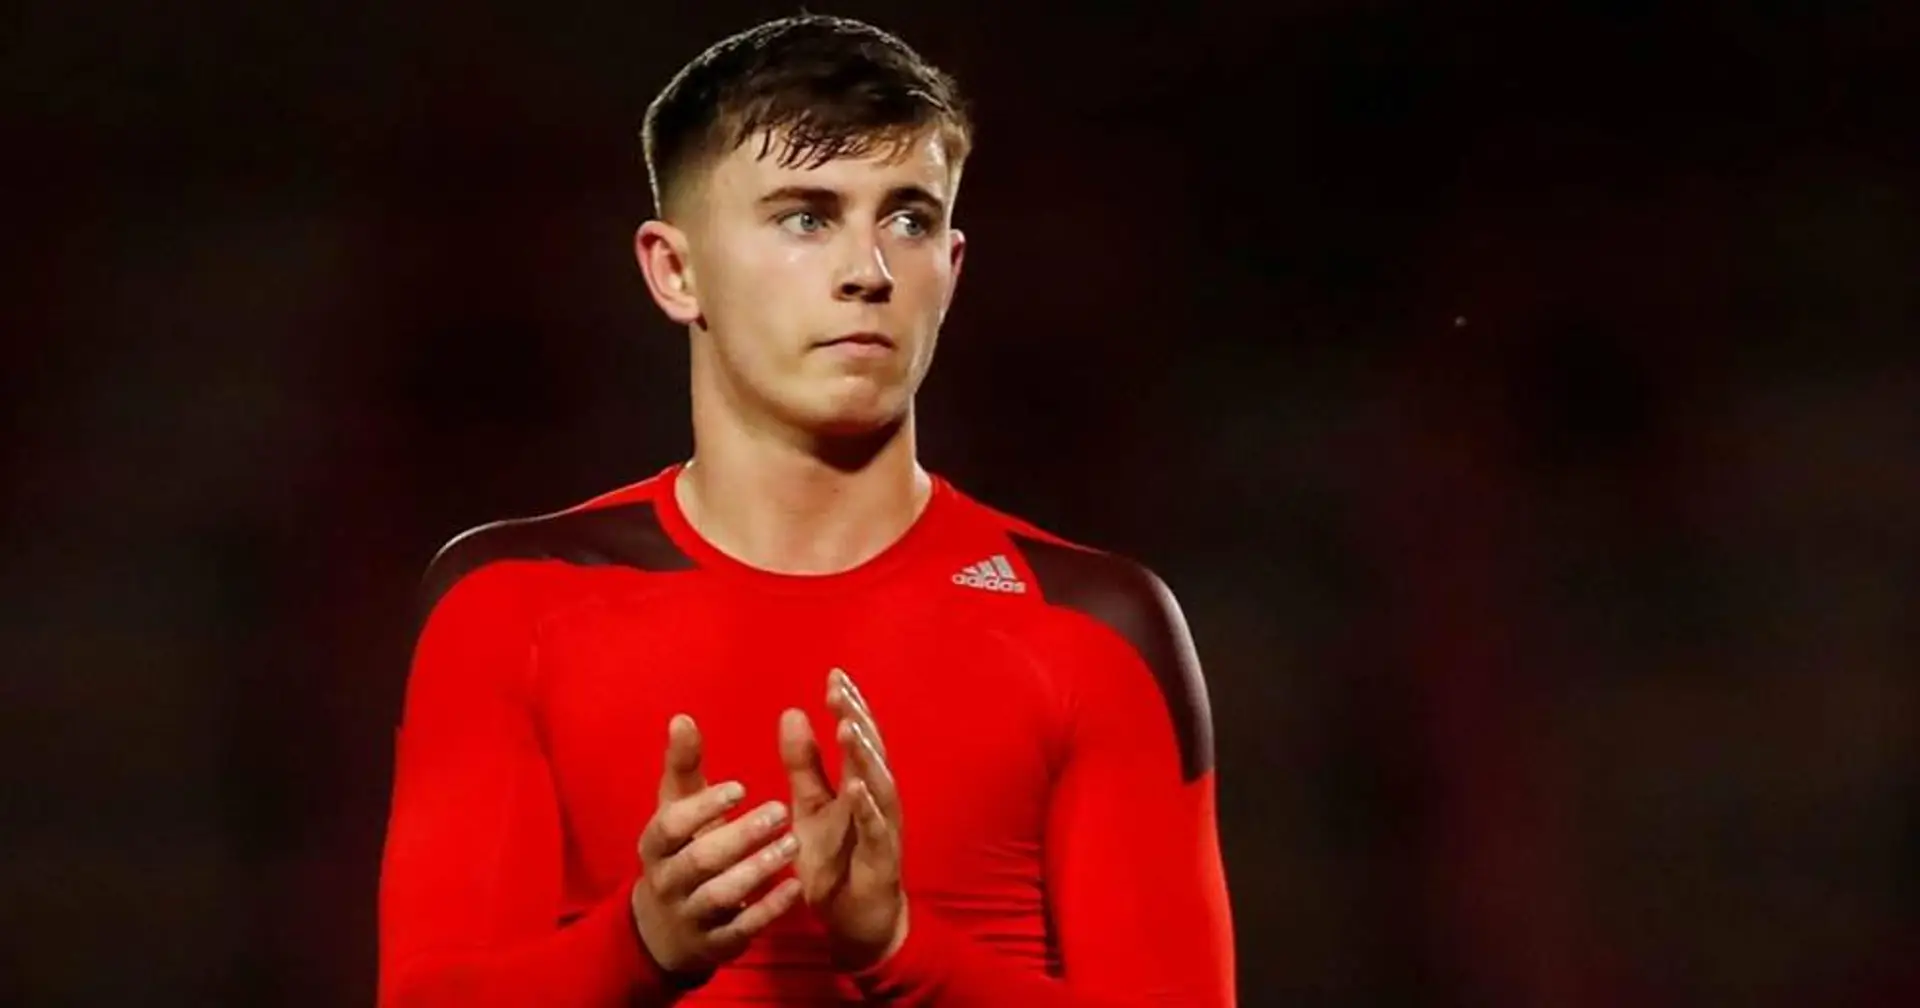 'He's started to believe in himself again': Wales U21 boss hopeful Ben Woodburn will find his stride